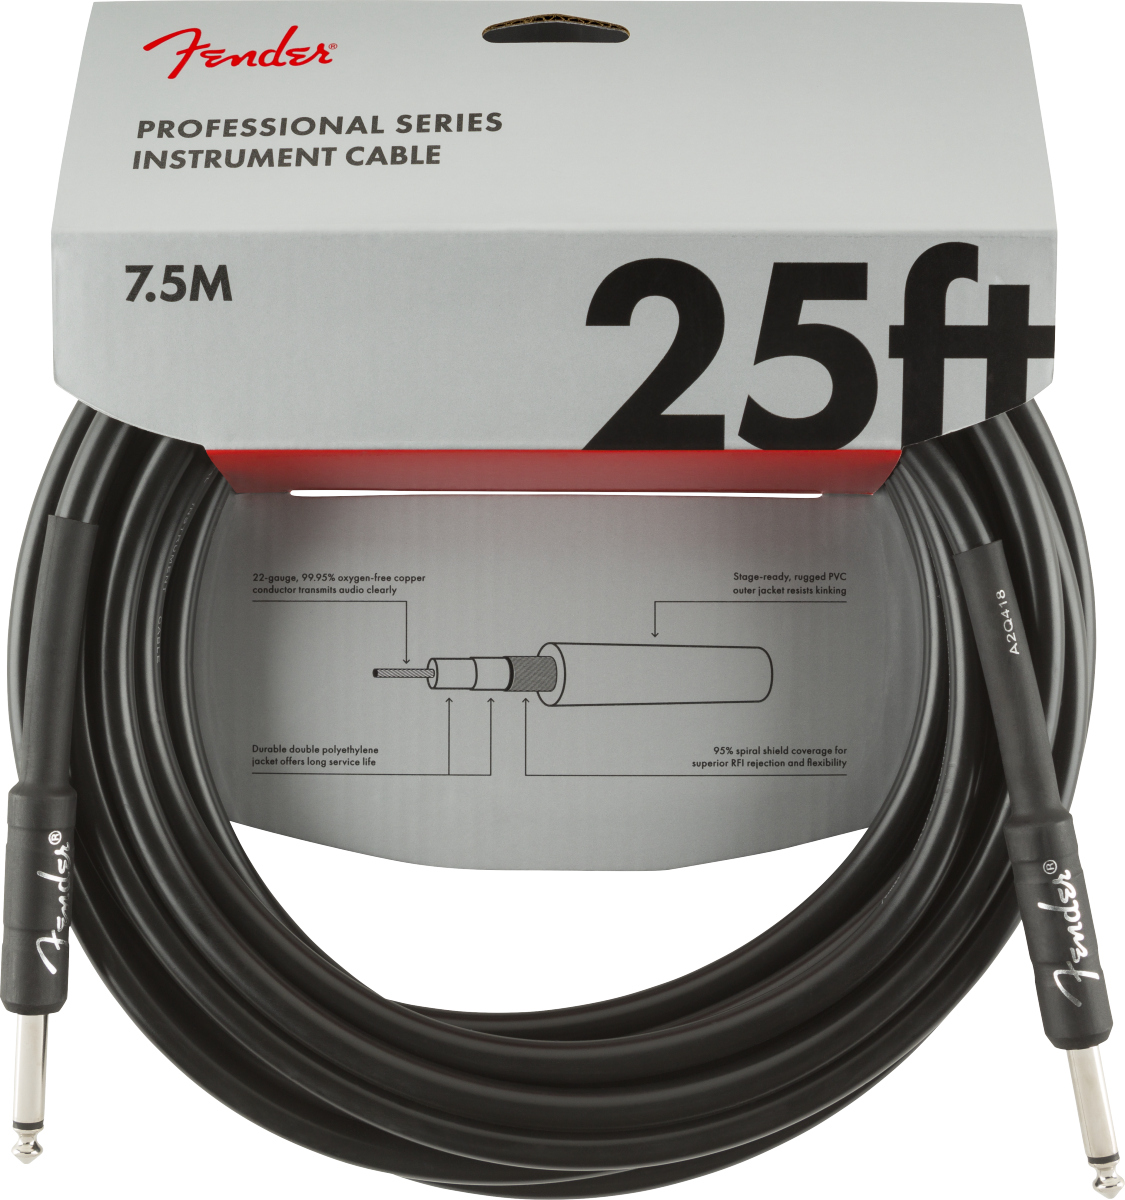 Fender Professional Series Instrument Cable 25ft - Straight to Straight